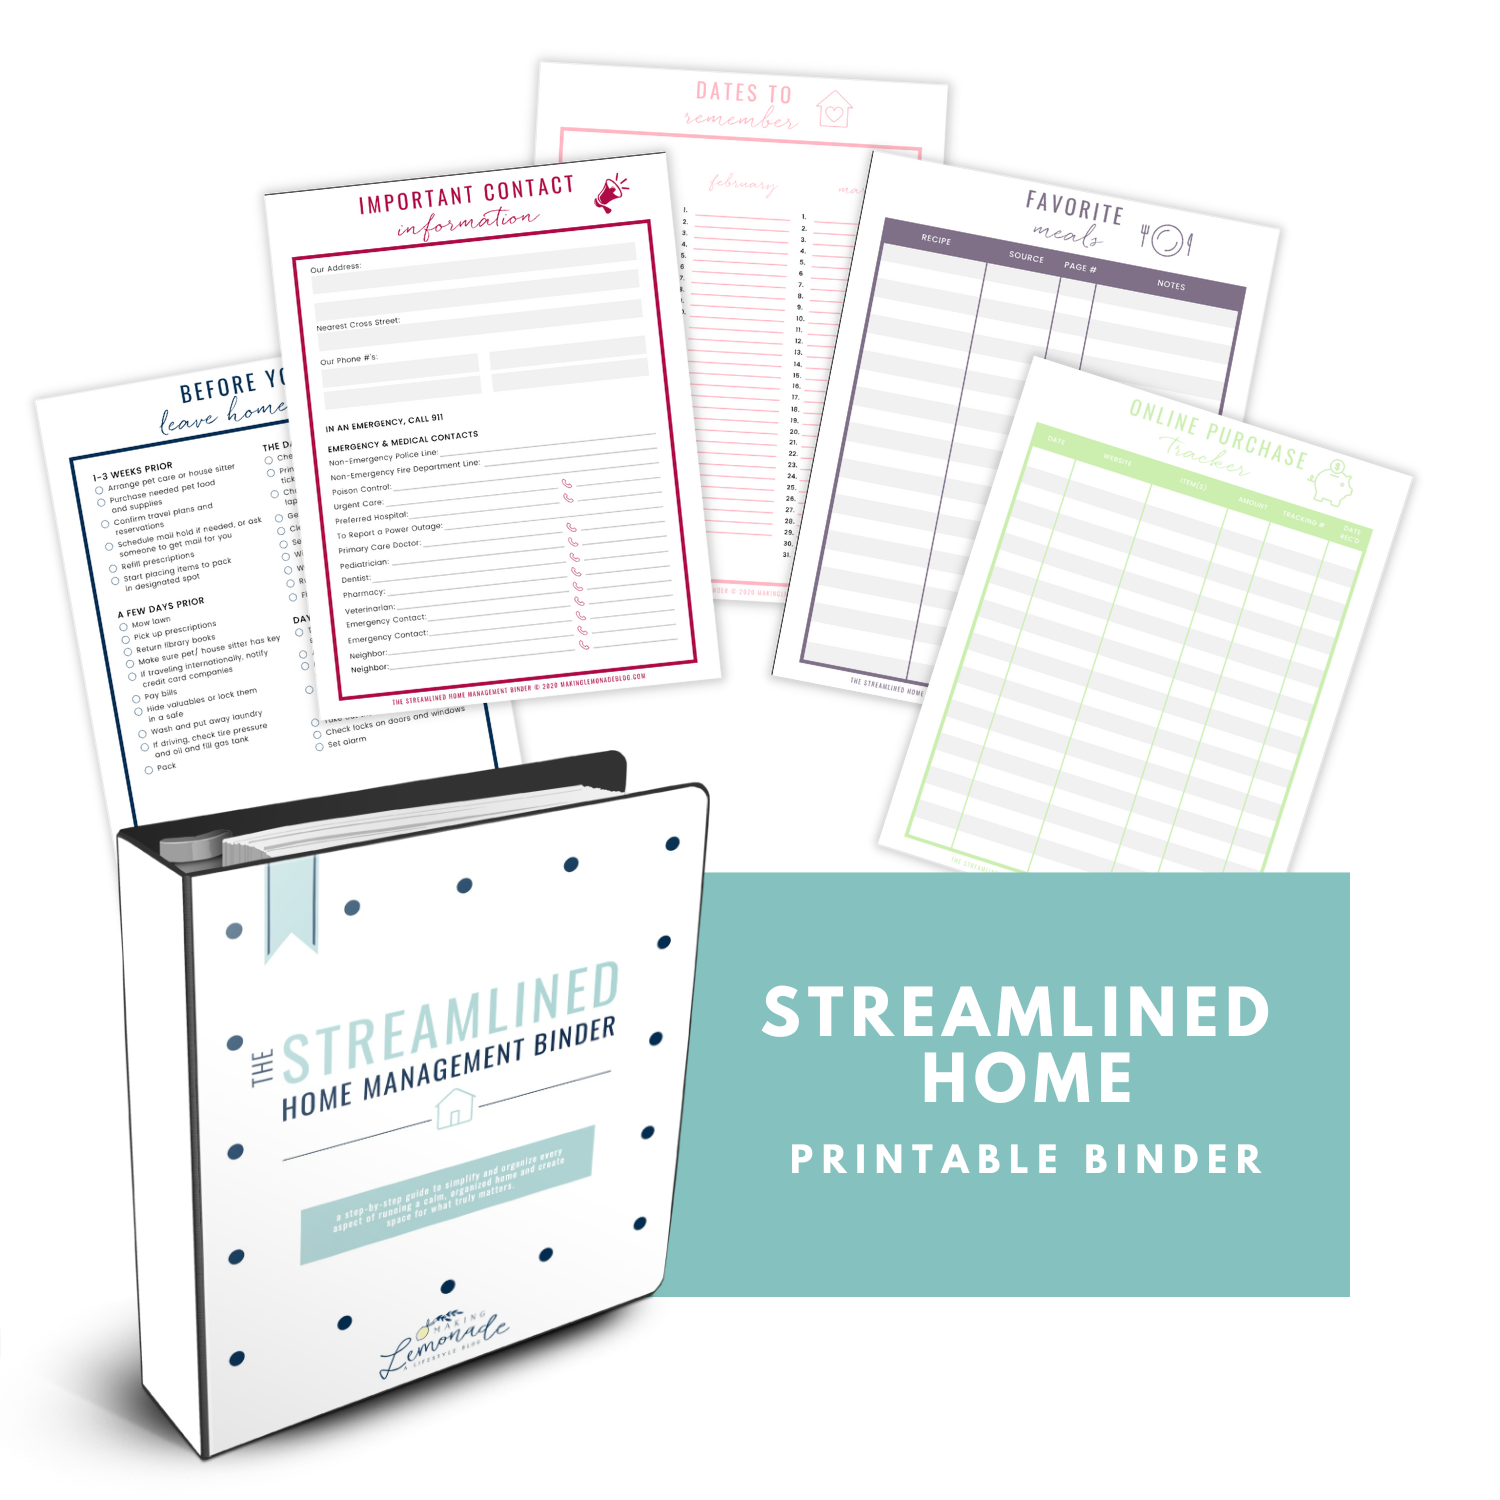 Get Organized With The Streamlined Home Management Binder Mockup